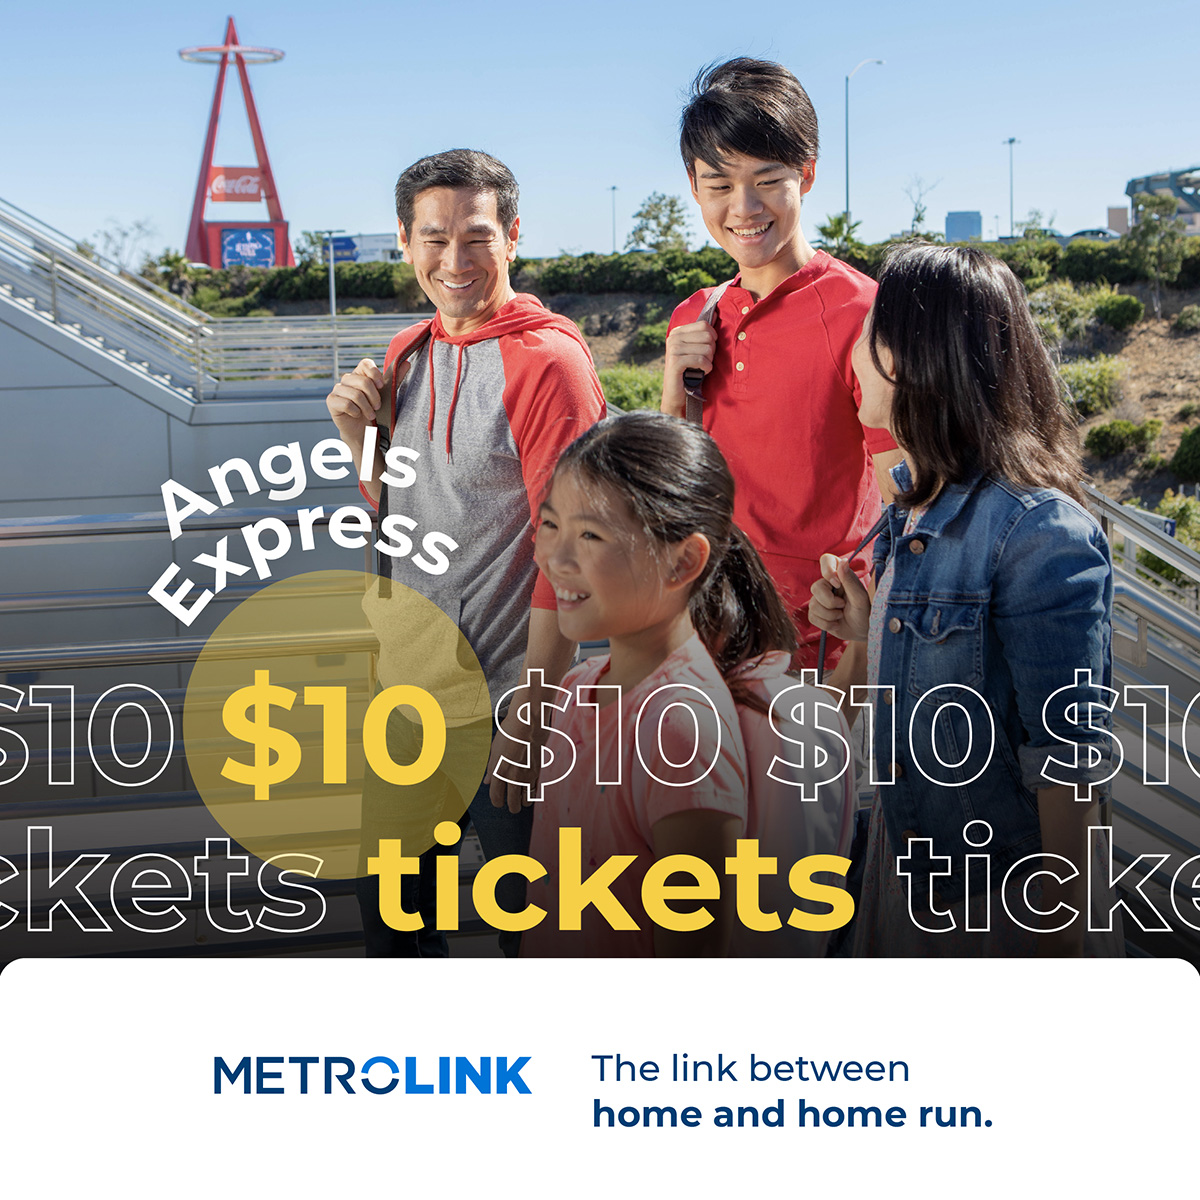 TOMORROW: Catch a round-trip ride on the #AngelsExpress Metrolink special service to scheduled weekend home games and select midweek games this season for $10. Up to three kids 17 and under ride free with each paying adult. #takethetrain Learn More: metrol.ink/430l9iI